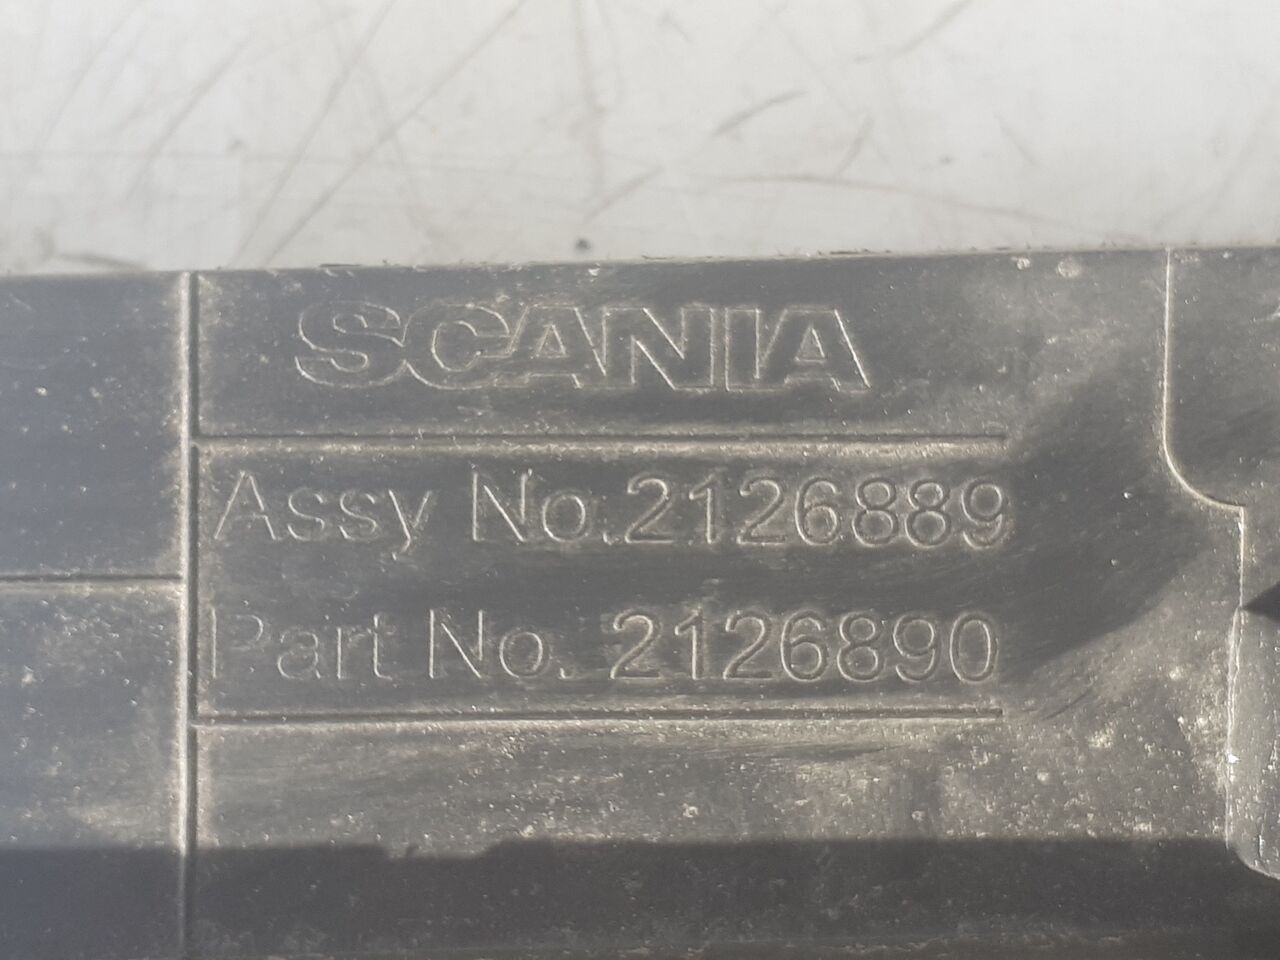 P450 front fascia for Scania L,P,G,R,S series truck